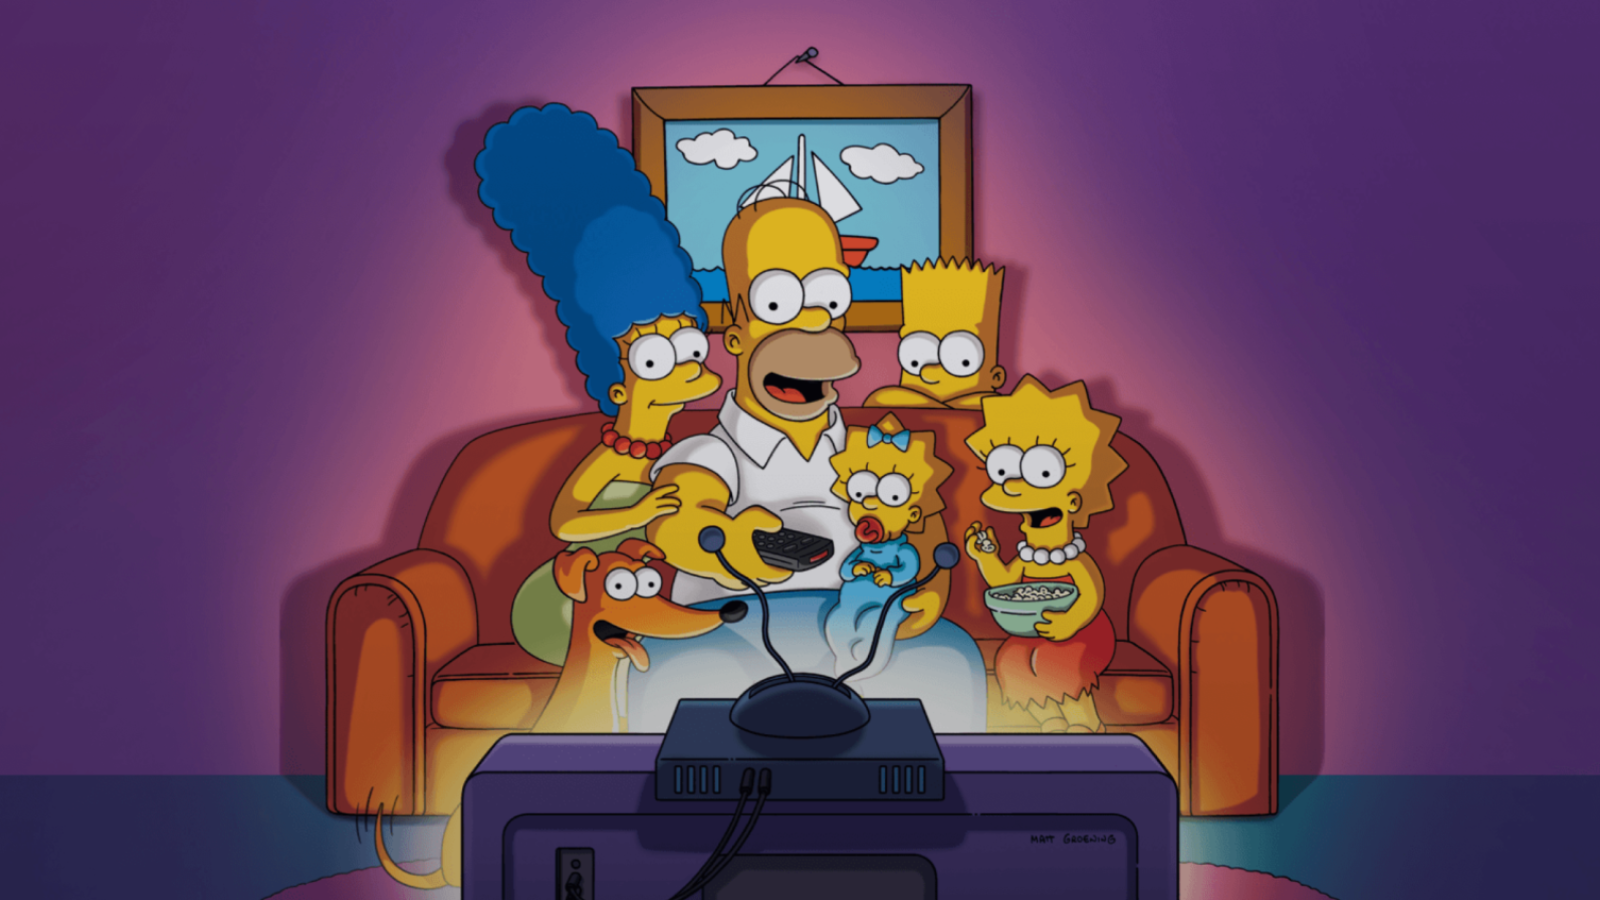 Watch 'The Simpsons' Season 32 Without Cable: Live Stream Online - TechNadu